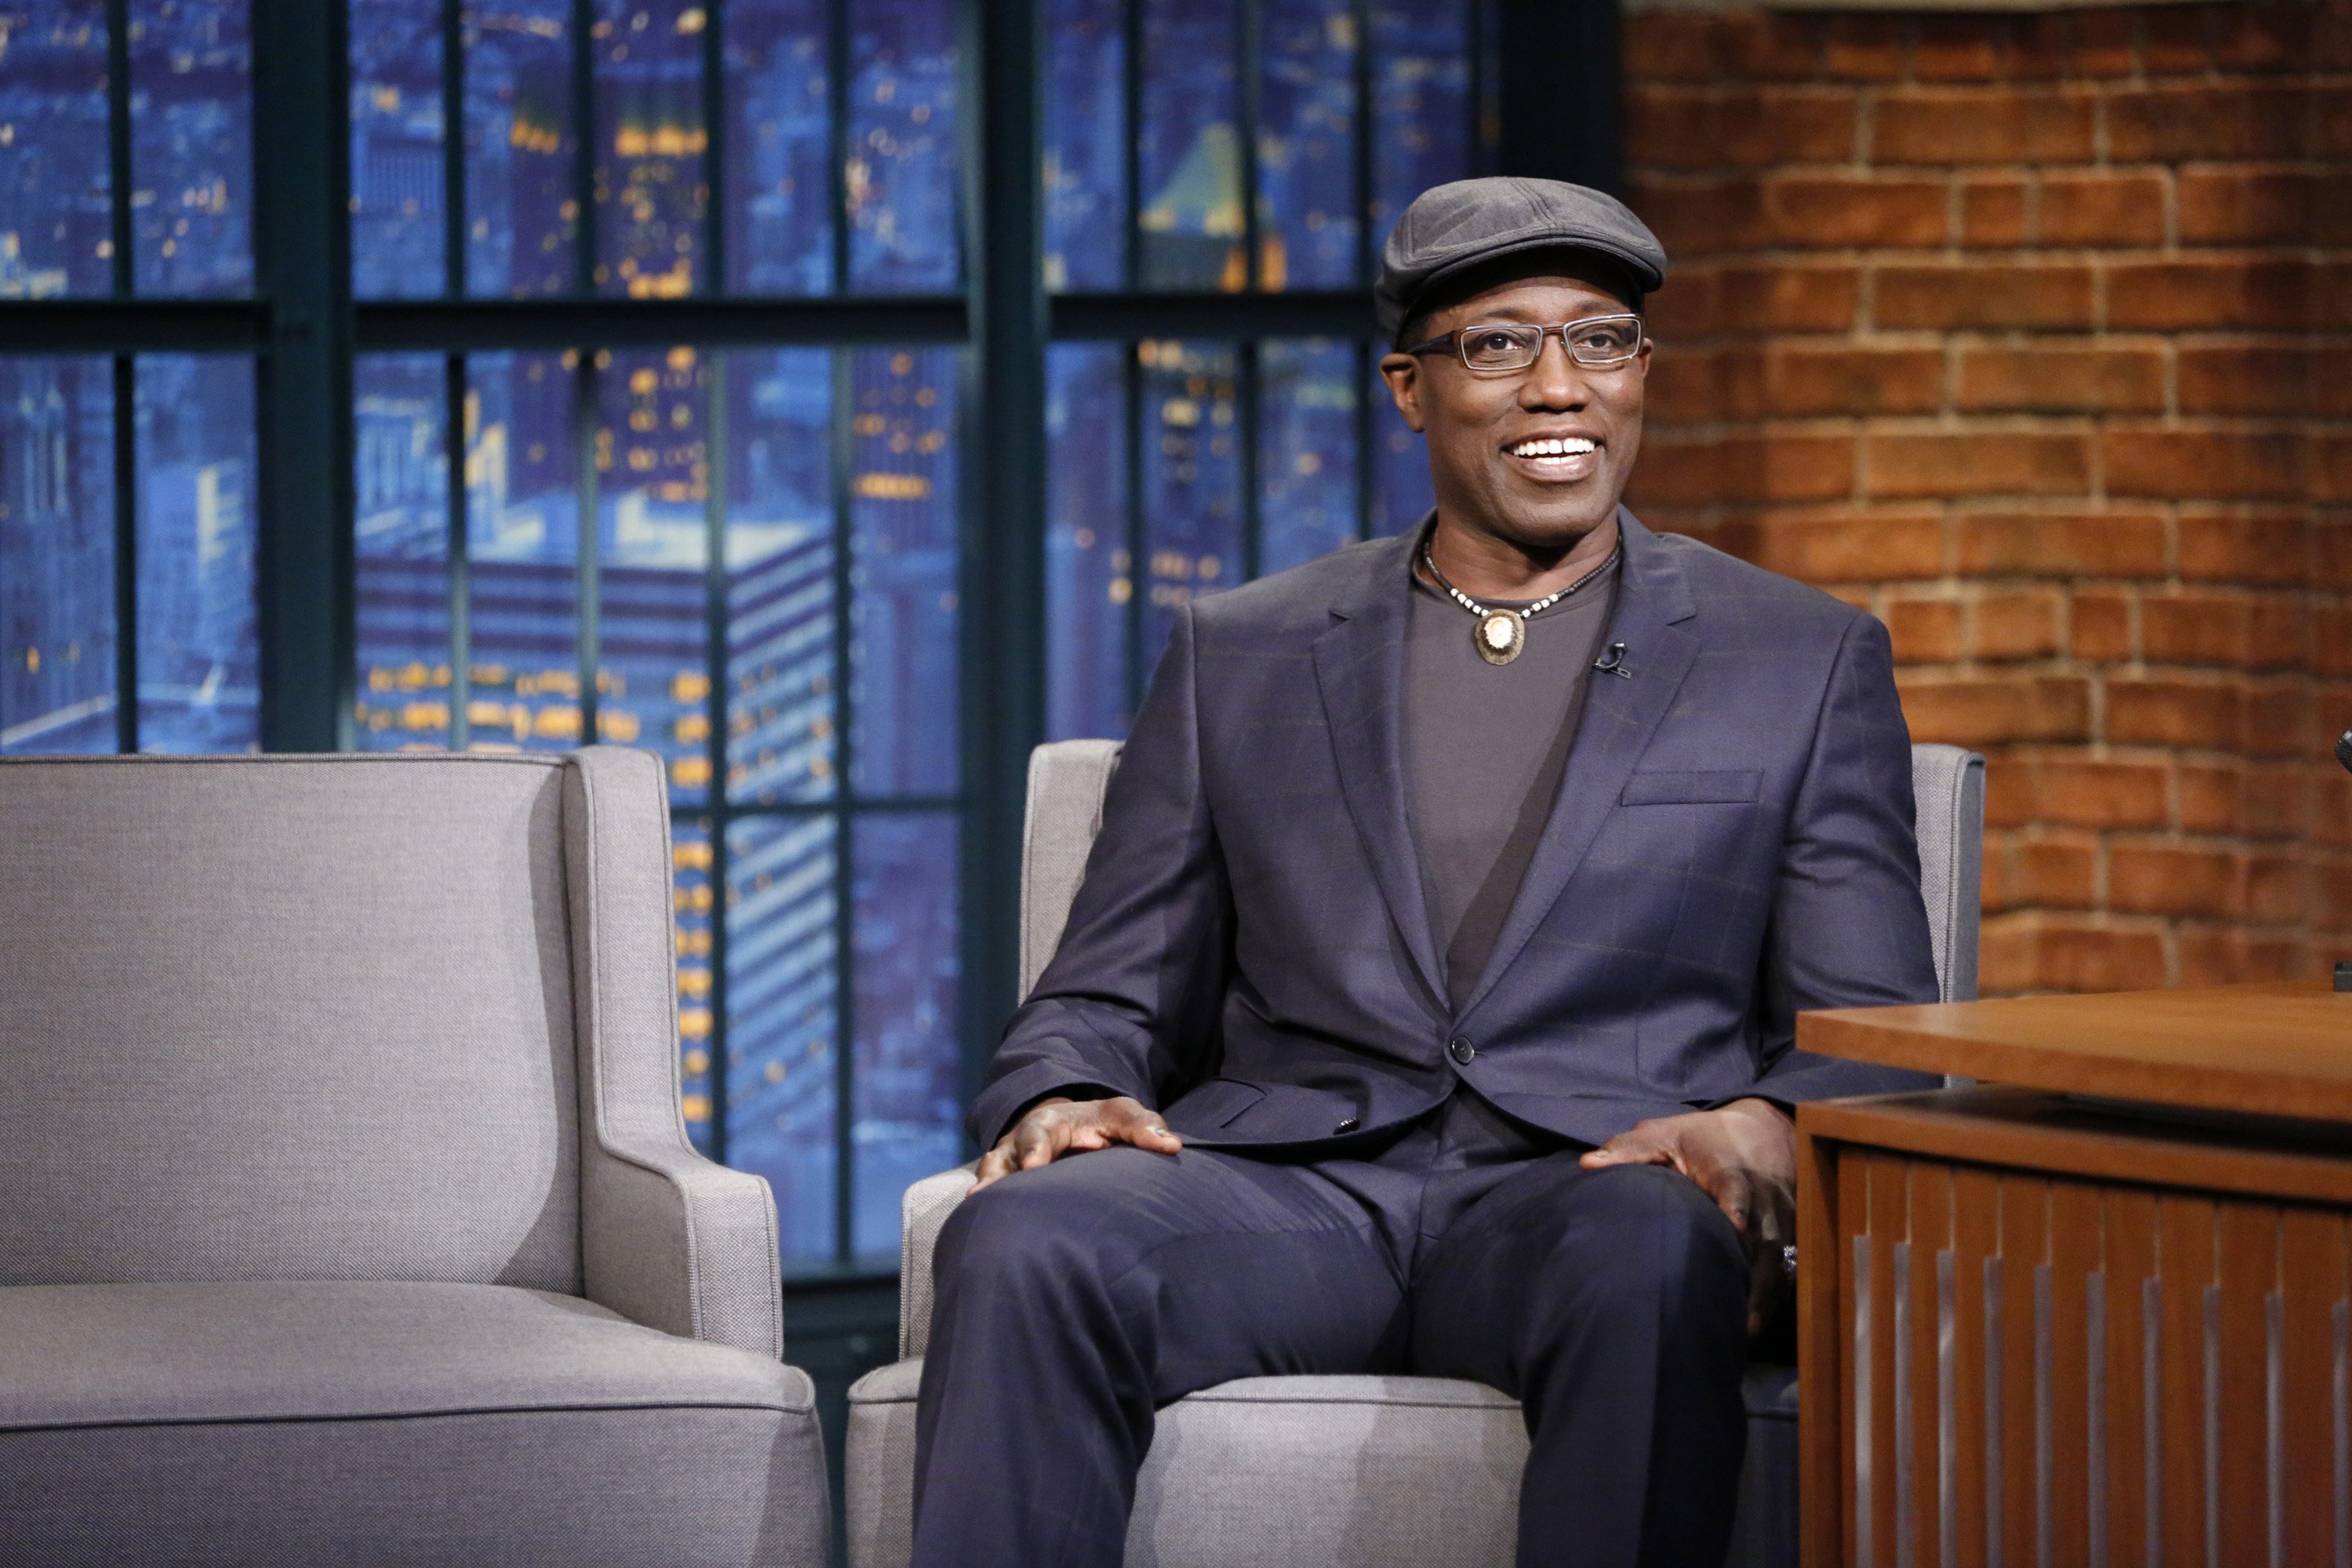 Wesley Snipes during an interview on "Late Night with Seth Meyers," on September 21, 2015 | Photo: Getty Images